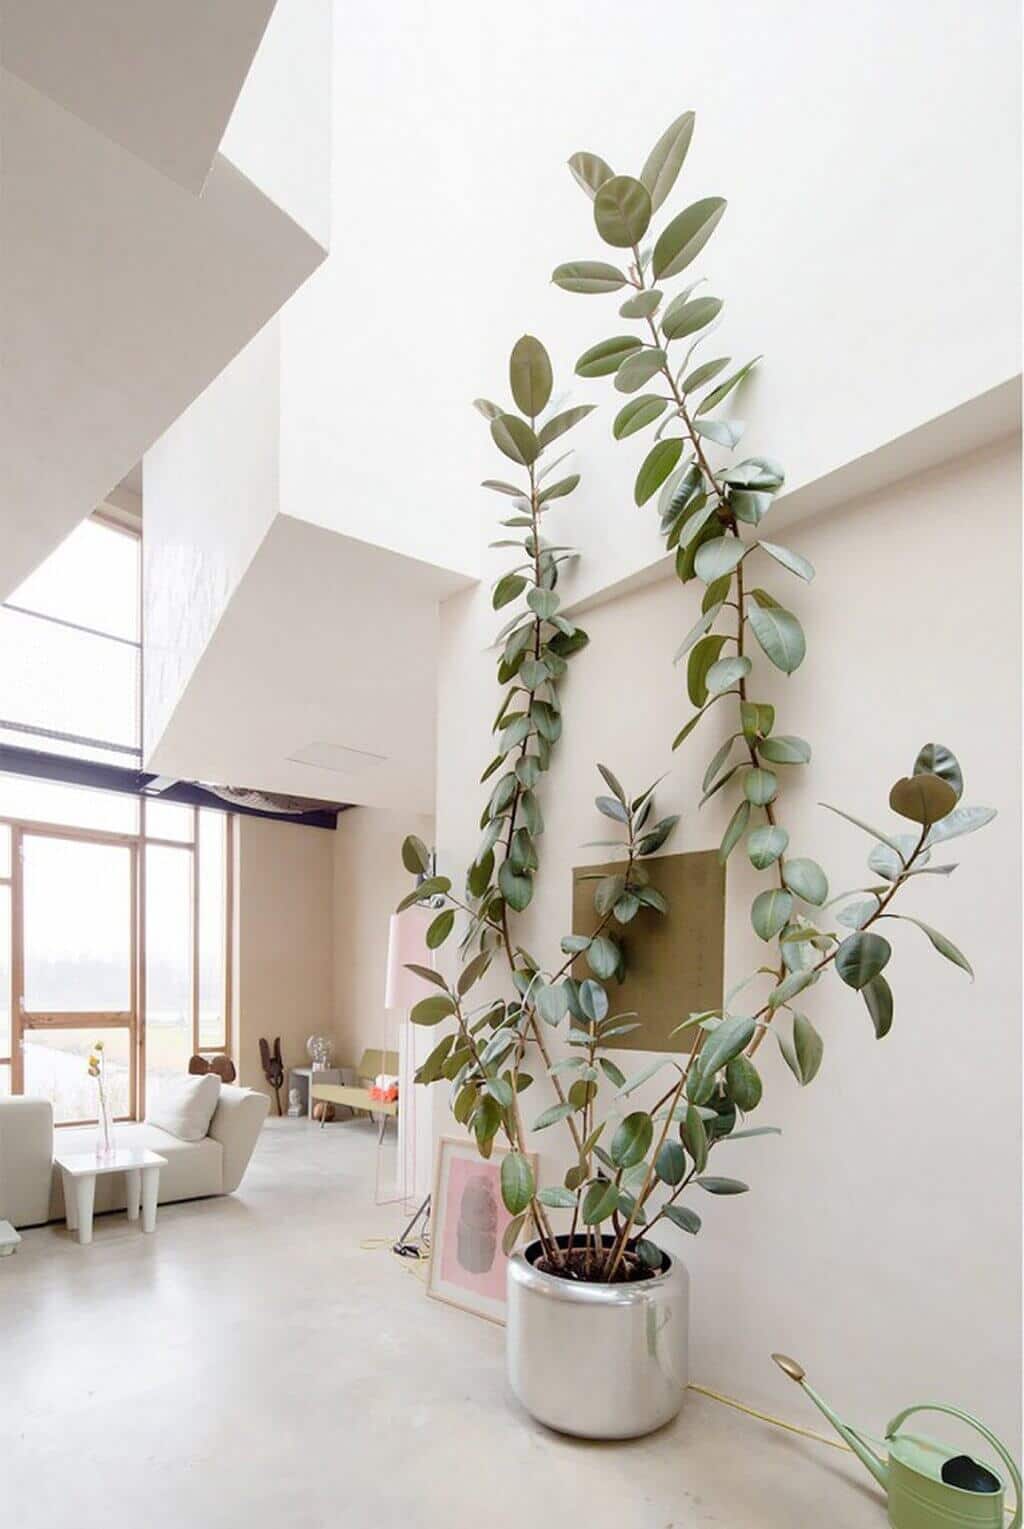 A Rubber Plant in a white pot on a table
